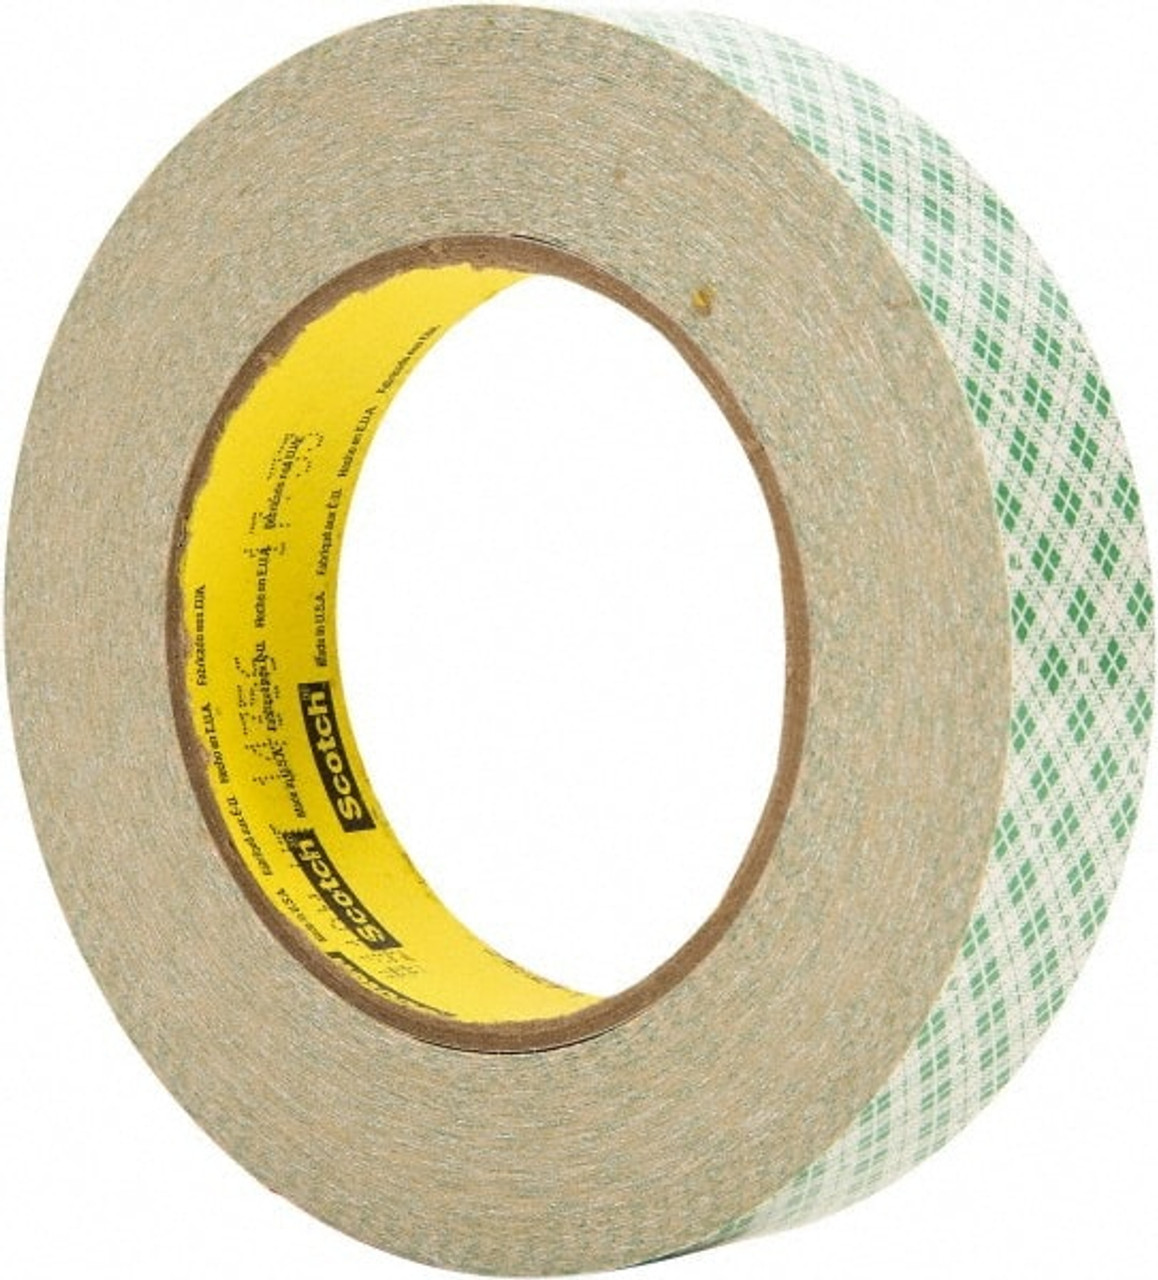 3M 36 Yd Rubber Adhesive Double Sided Tape 5 mil Thick, Paper Liner  7000049274 - 65842429